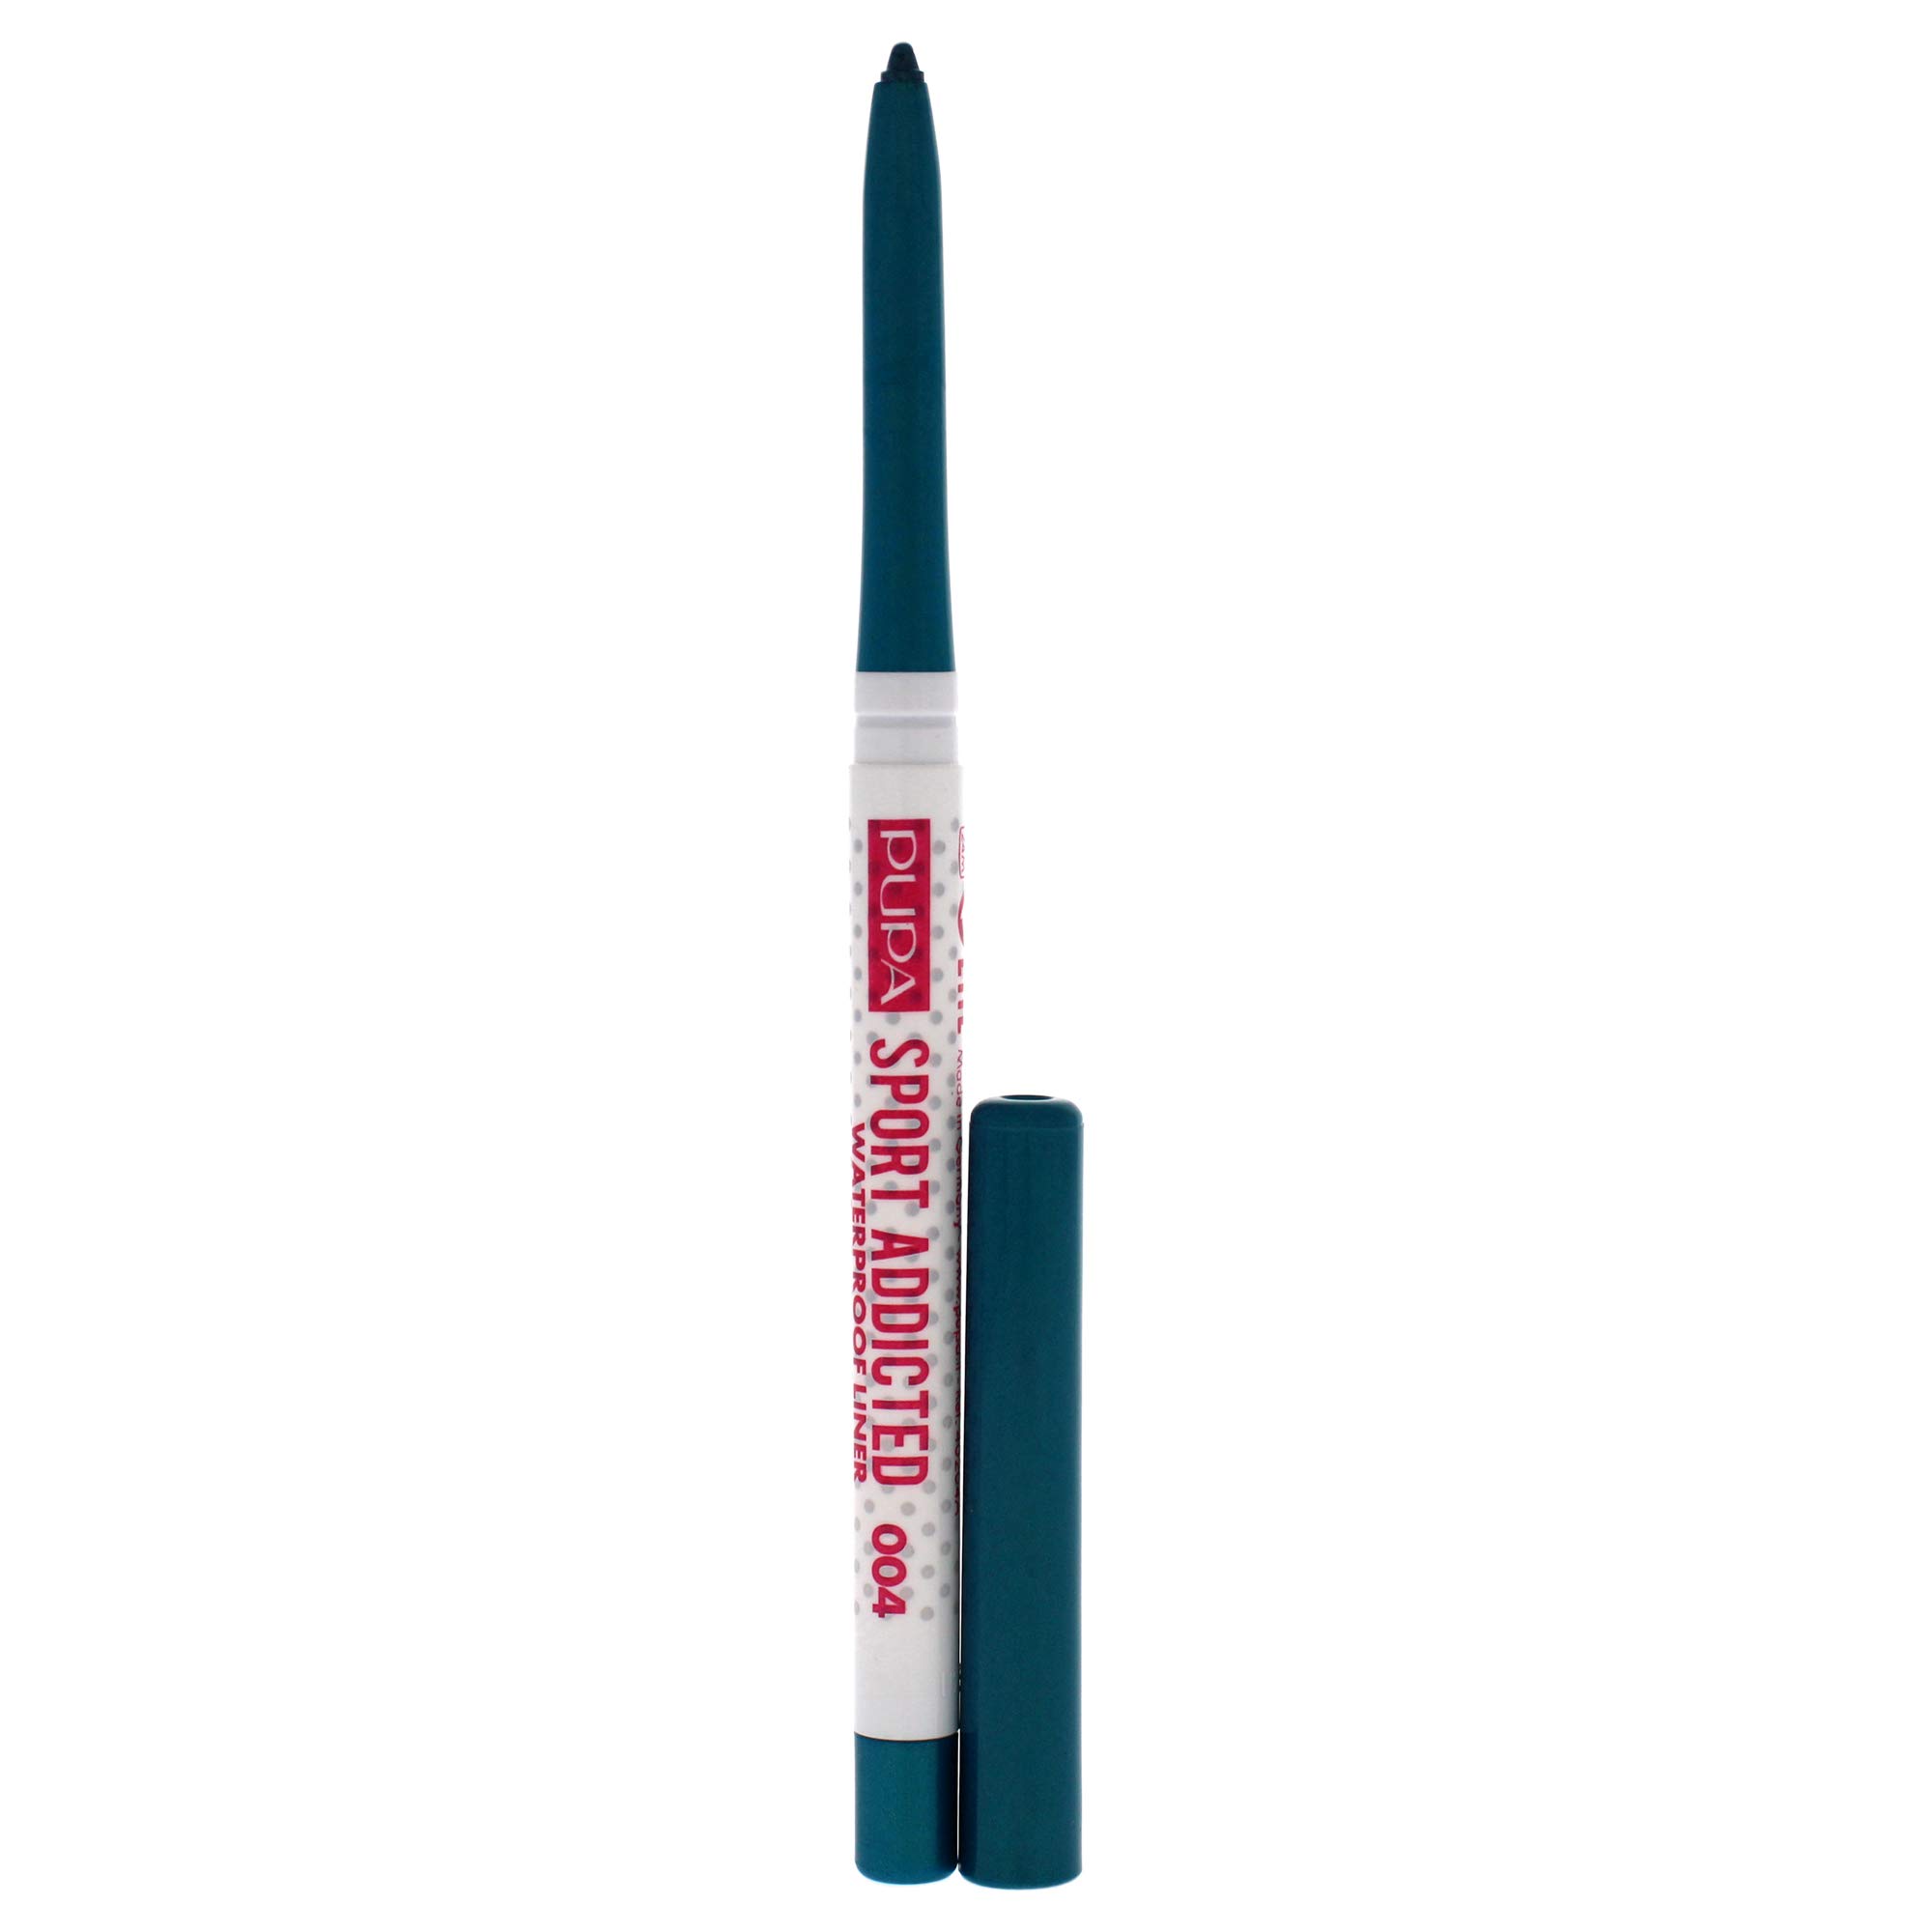 Pupa Milano Sport Addicted Waterproof Liner - 004 Sporty Emeraled For Women 0.3g Eyeliner